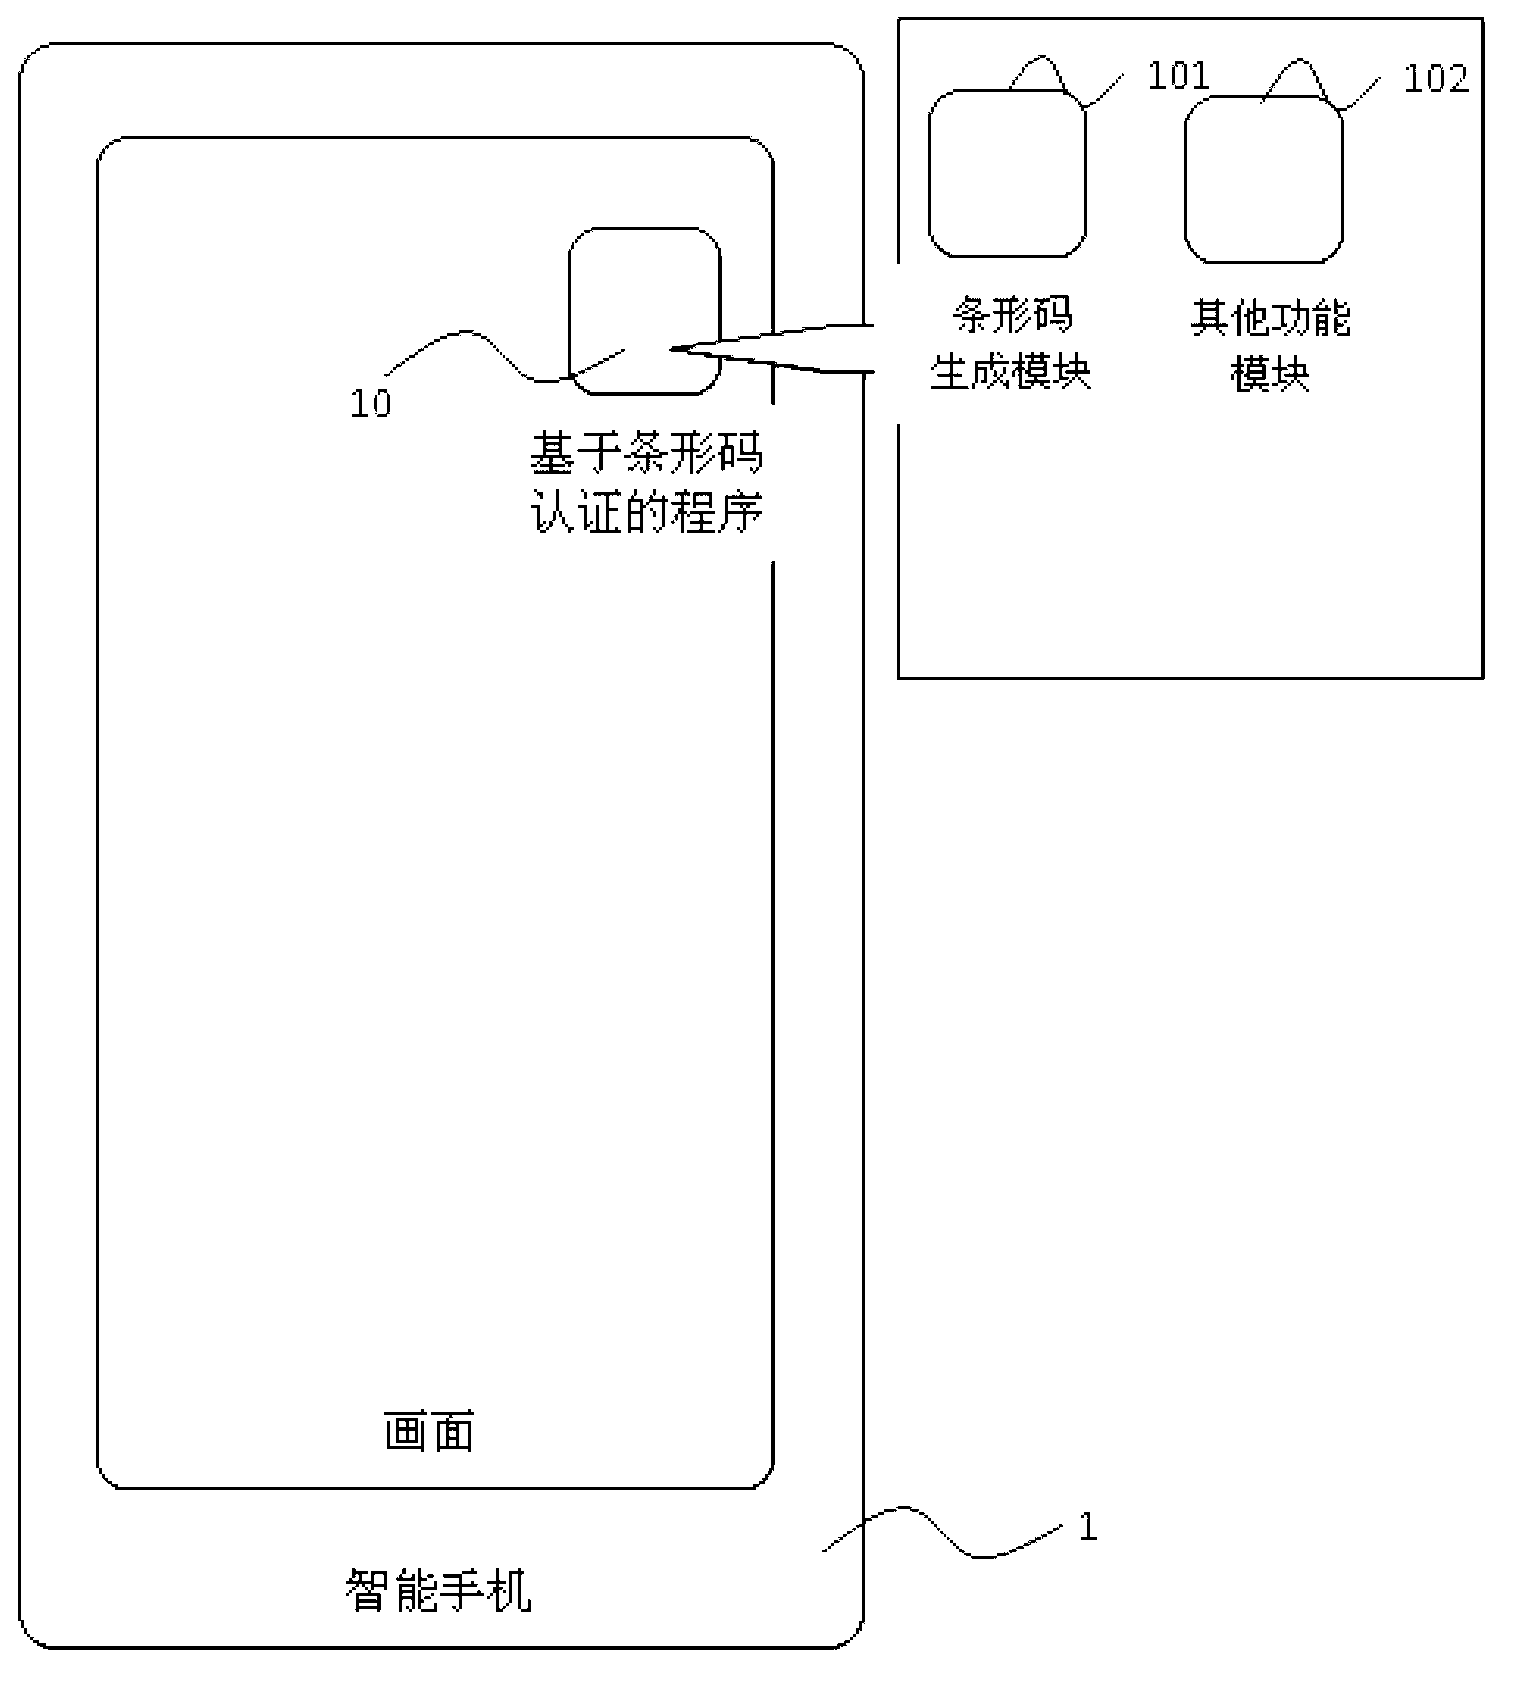 ID authentication method based on representation of barcode